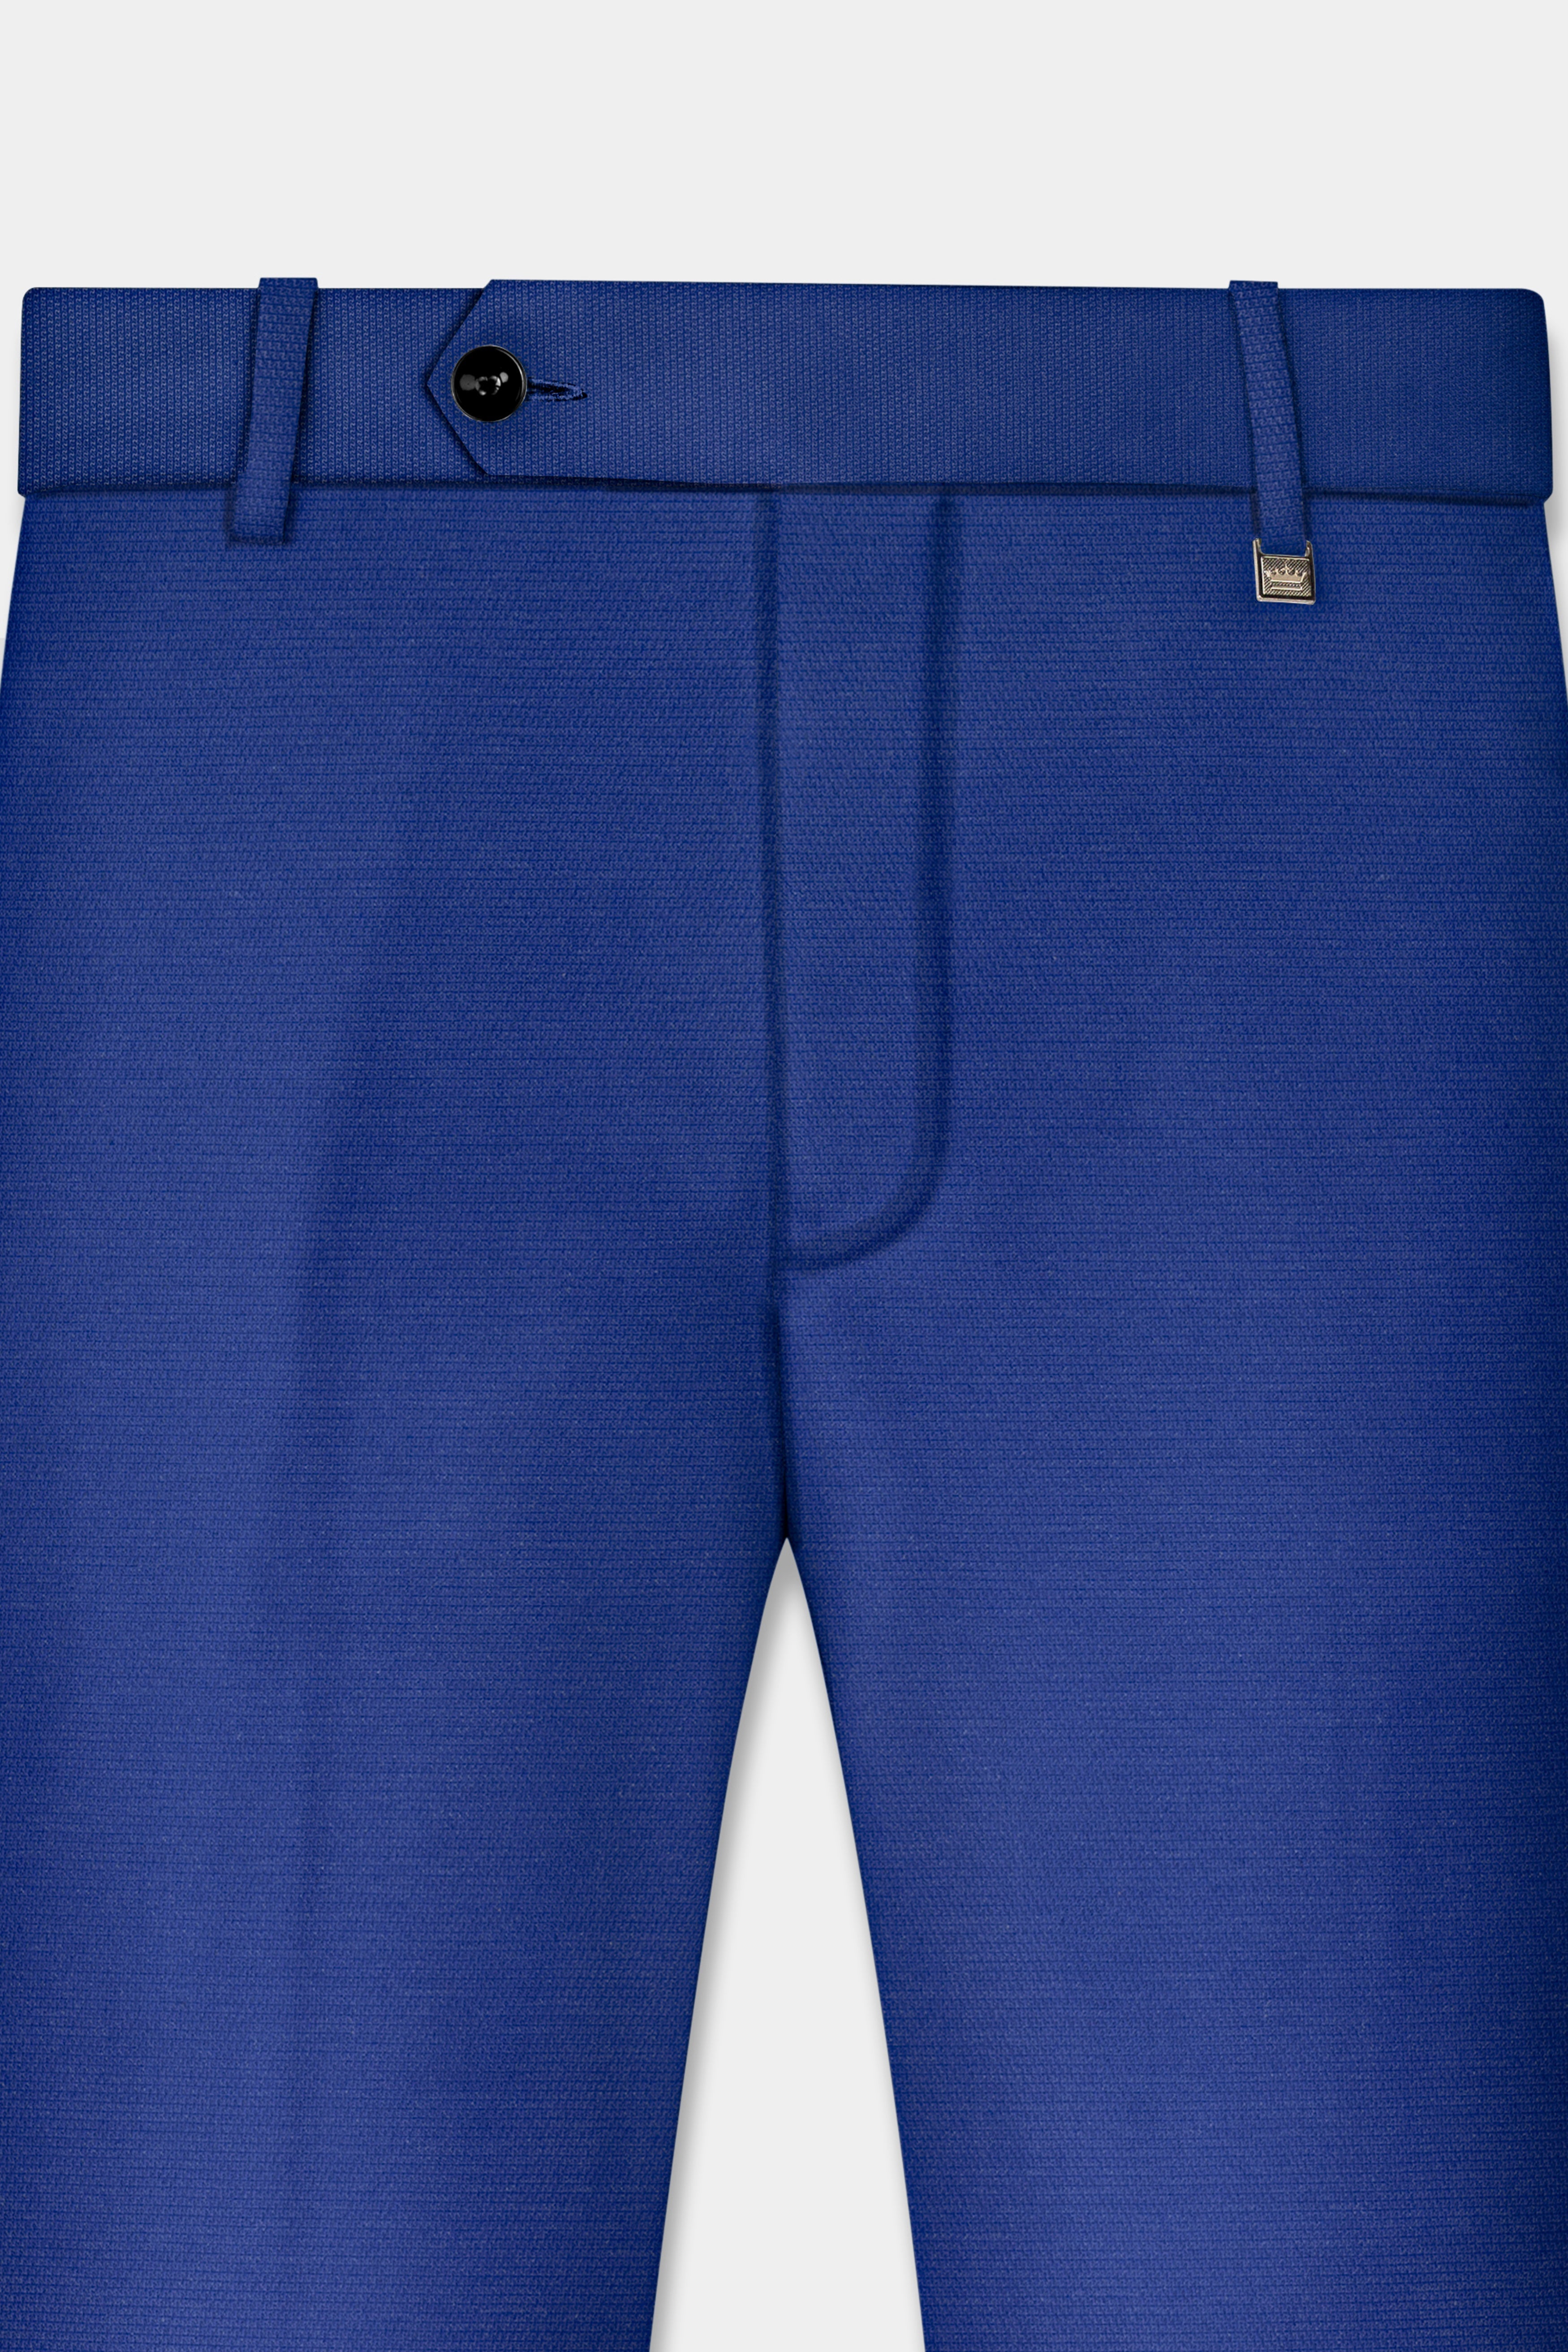 Catalina Blue Dobby Textured Wool Blend Pant